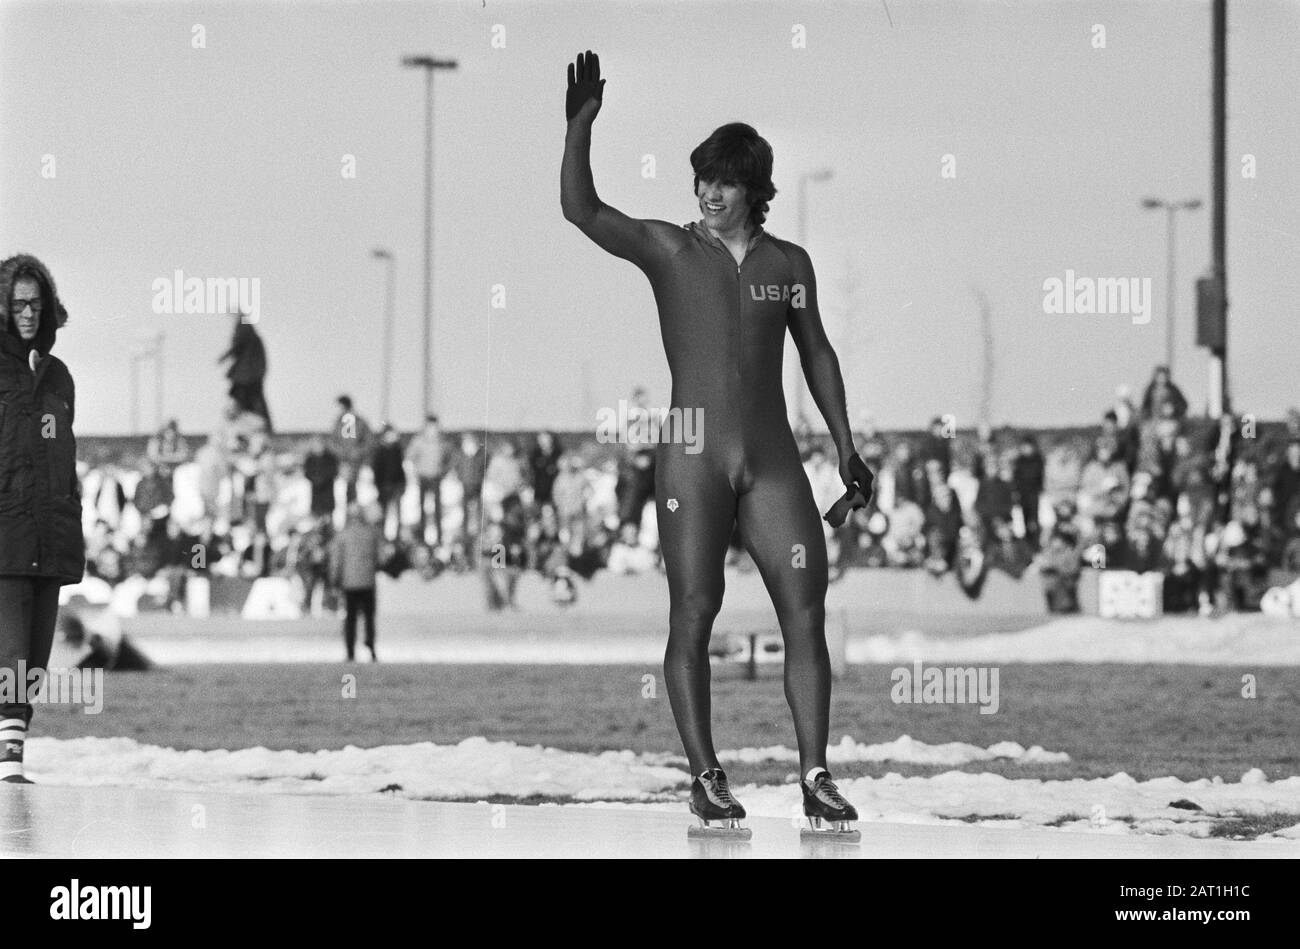 Ice skating competitions to the Unionkaas Trophy in Alkmaar  Eric Heiden (United States) waves to the public while driving out after his ride on the 3000 meters. Date: February 25, 1979 Location: Alkmaar, Noord-Holland Keywords: skating, sports Person name: Heiden, Eric Stock Photo